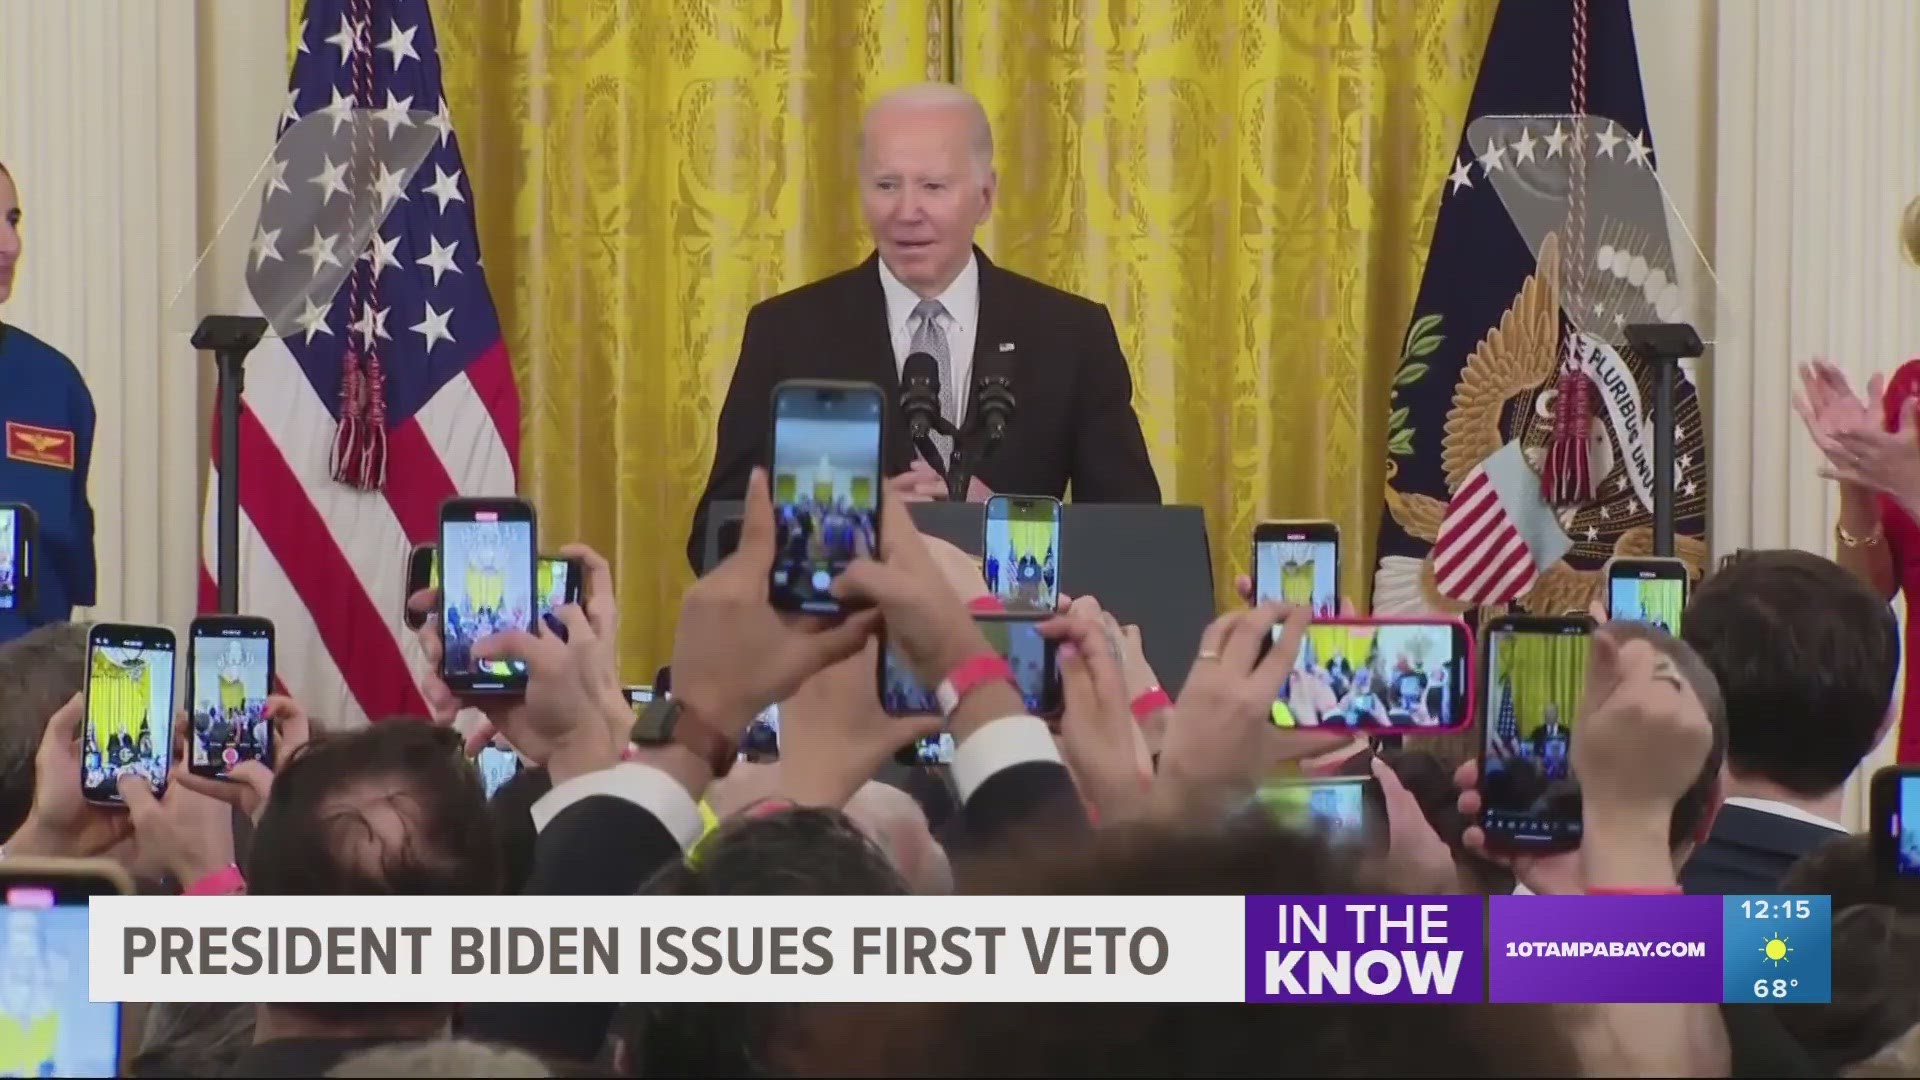 Only two Democrats in the Senate voted for the measure, making an override of Biden's veto unlikely.